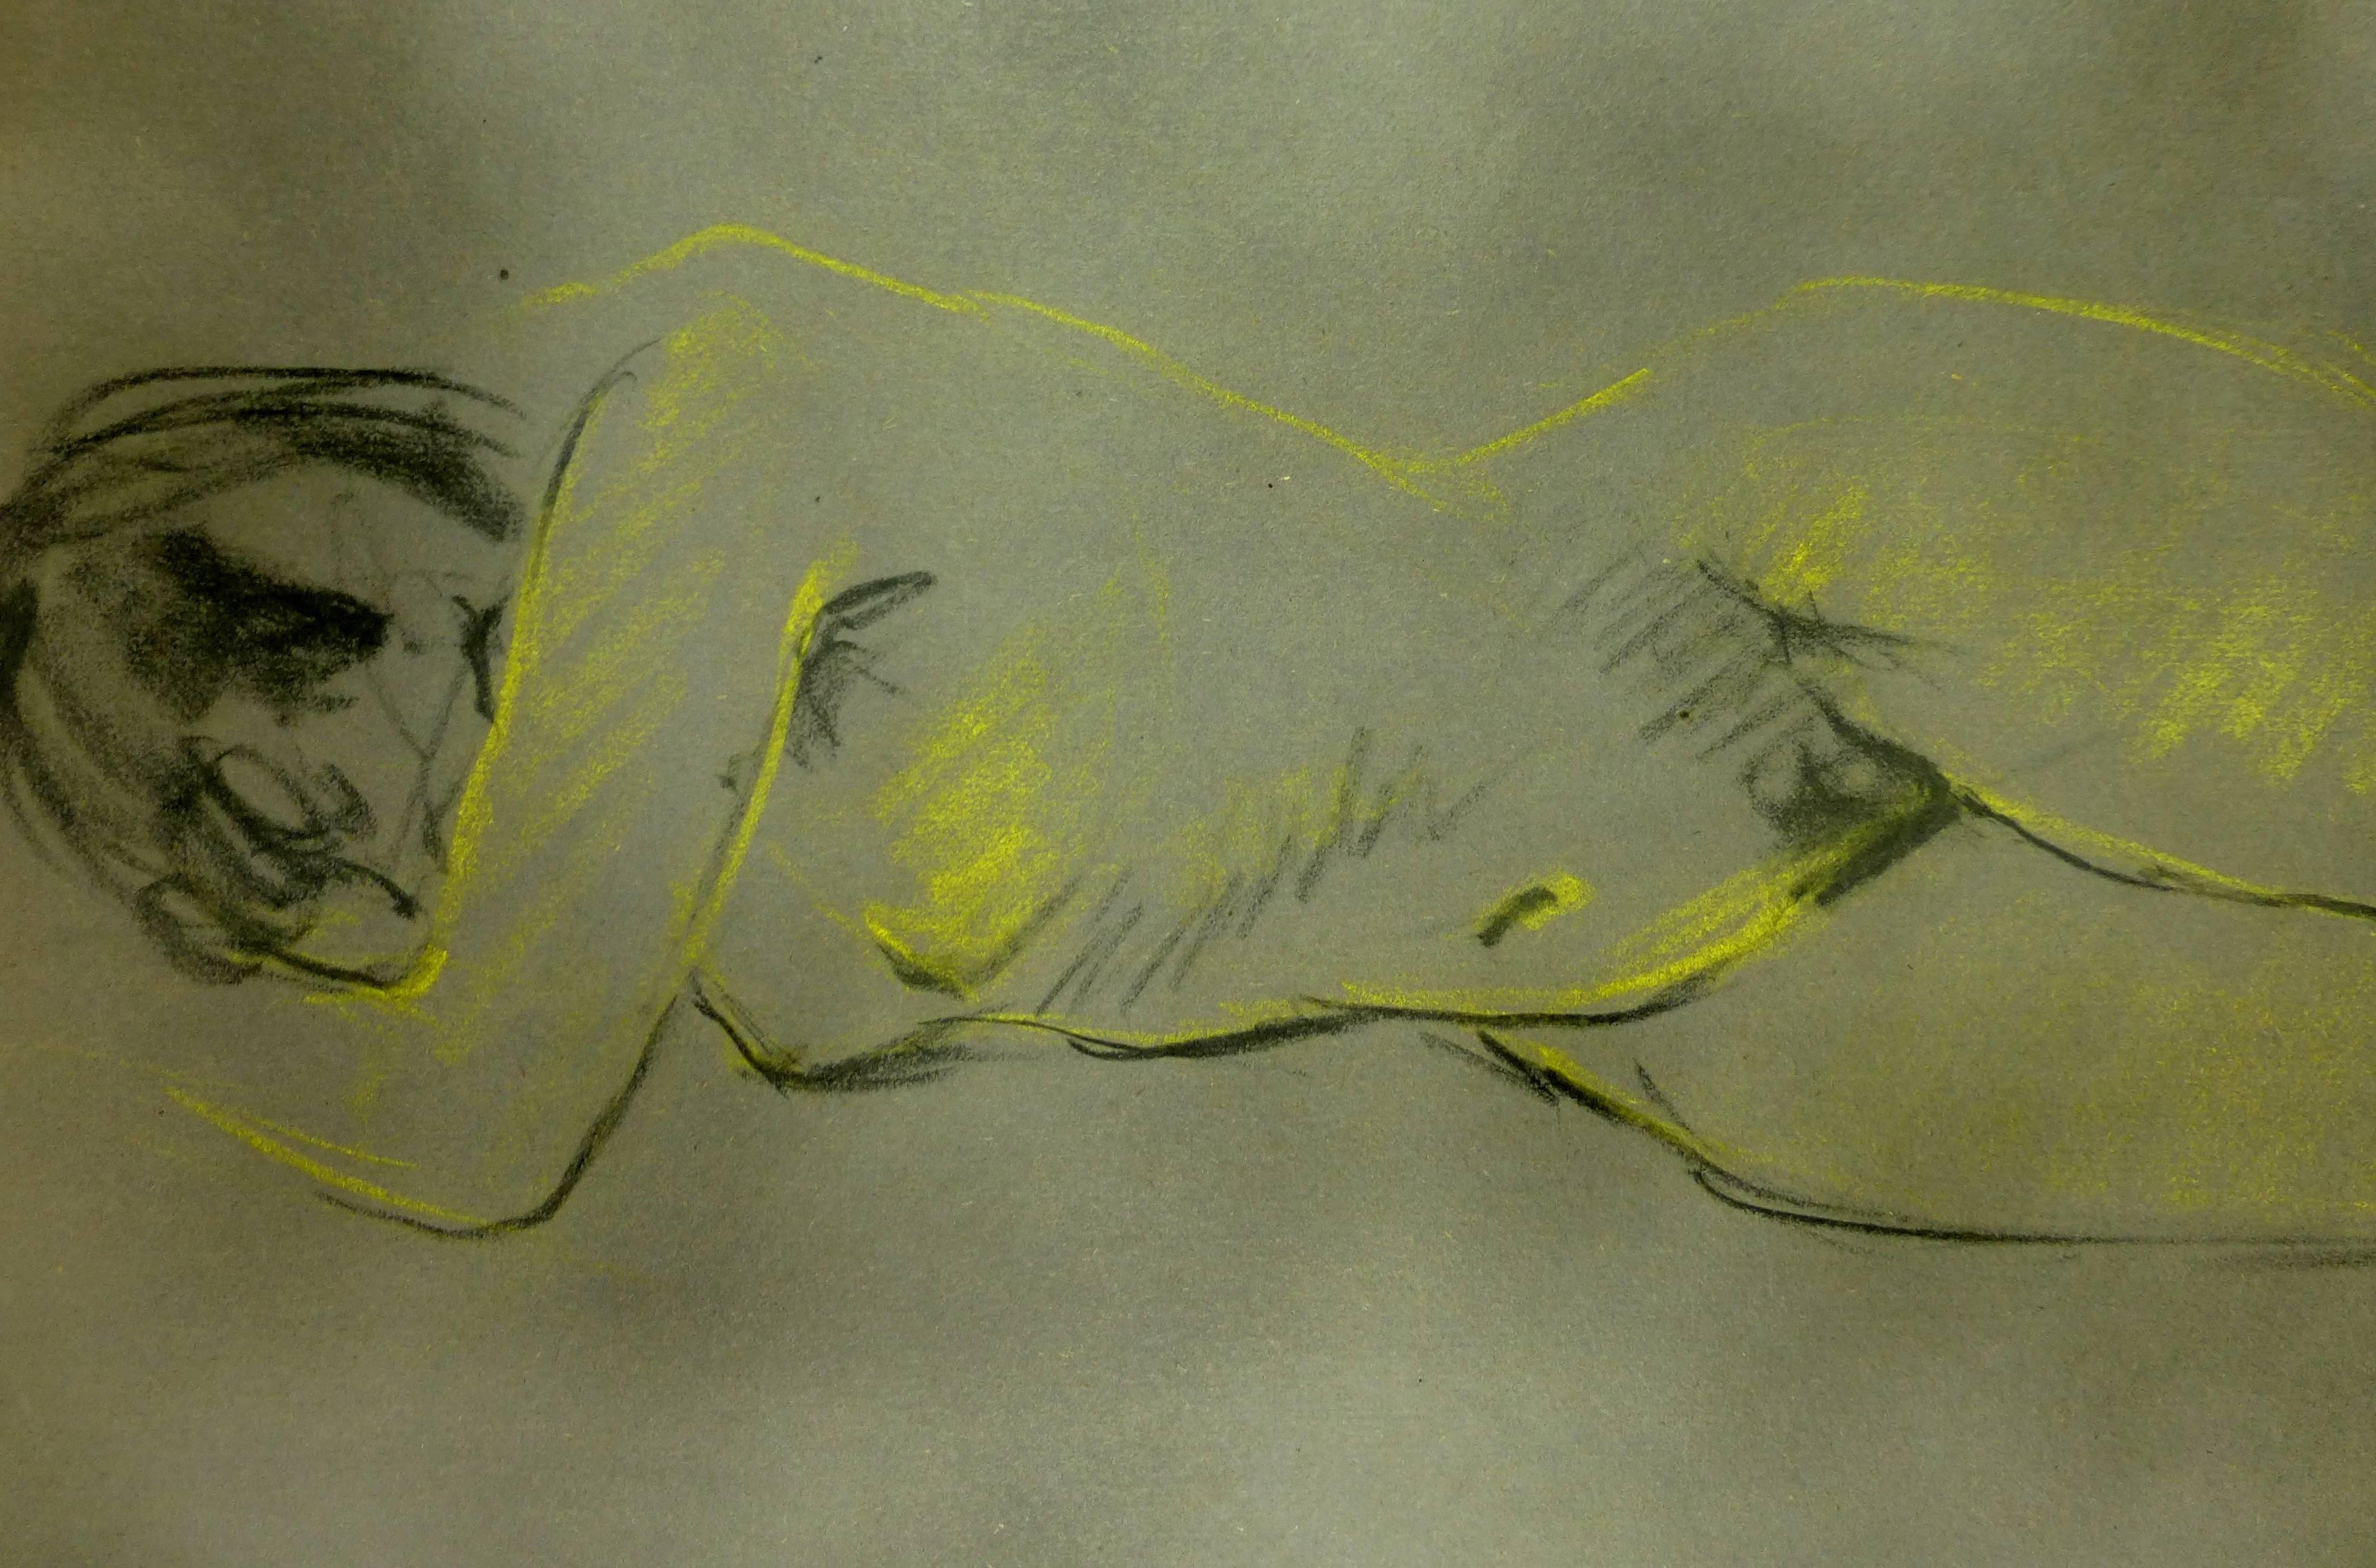 Dramatic pencil and pastel nude sketch on darkened paper with vibrant yellow highlights, circa 1990.

Original artwork on paper displayed on a white mat with a gold border. Archival plastic sleeve and Certificate of Authenticity included. Artwork,